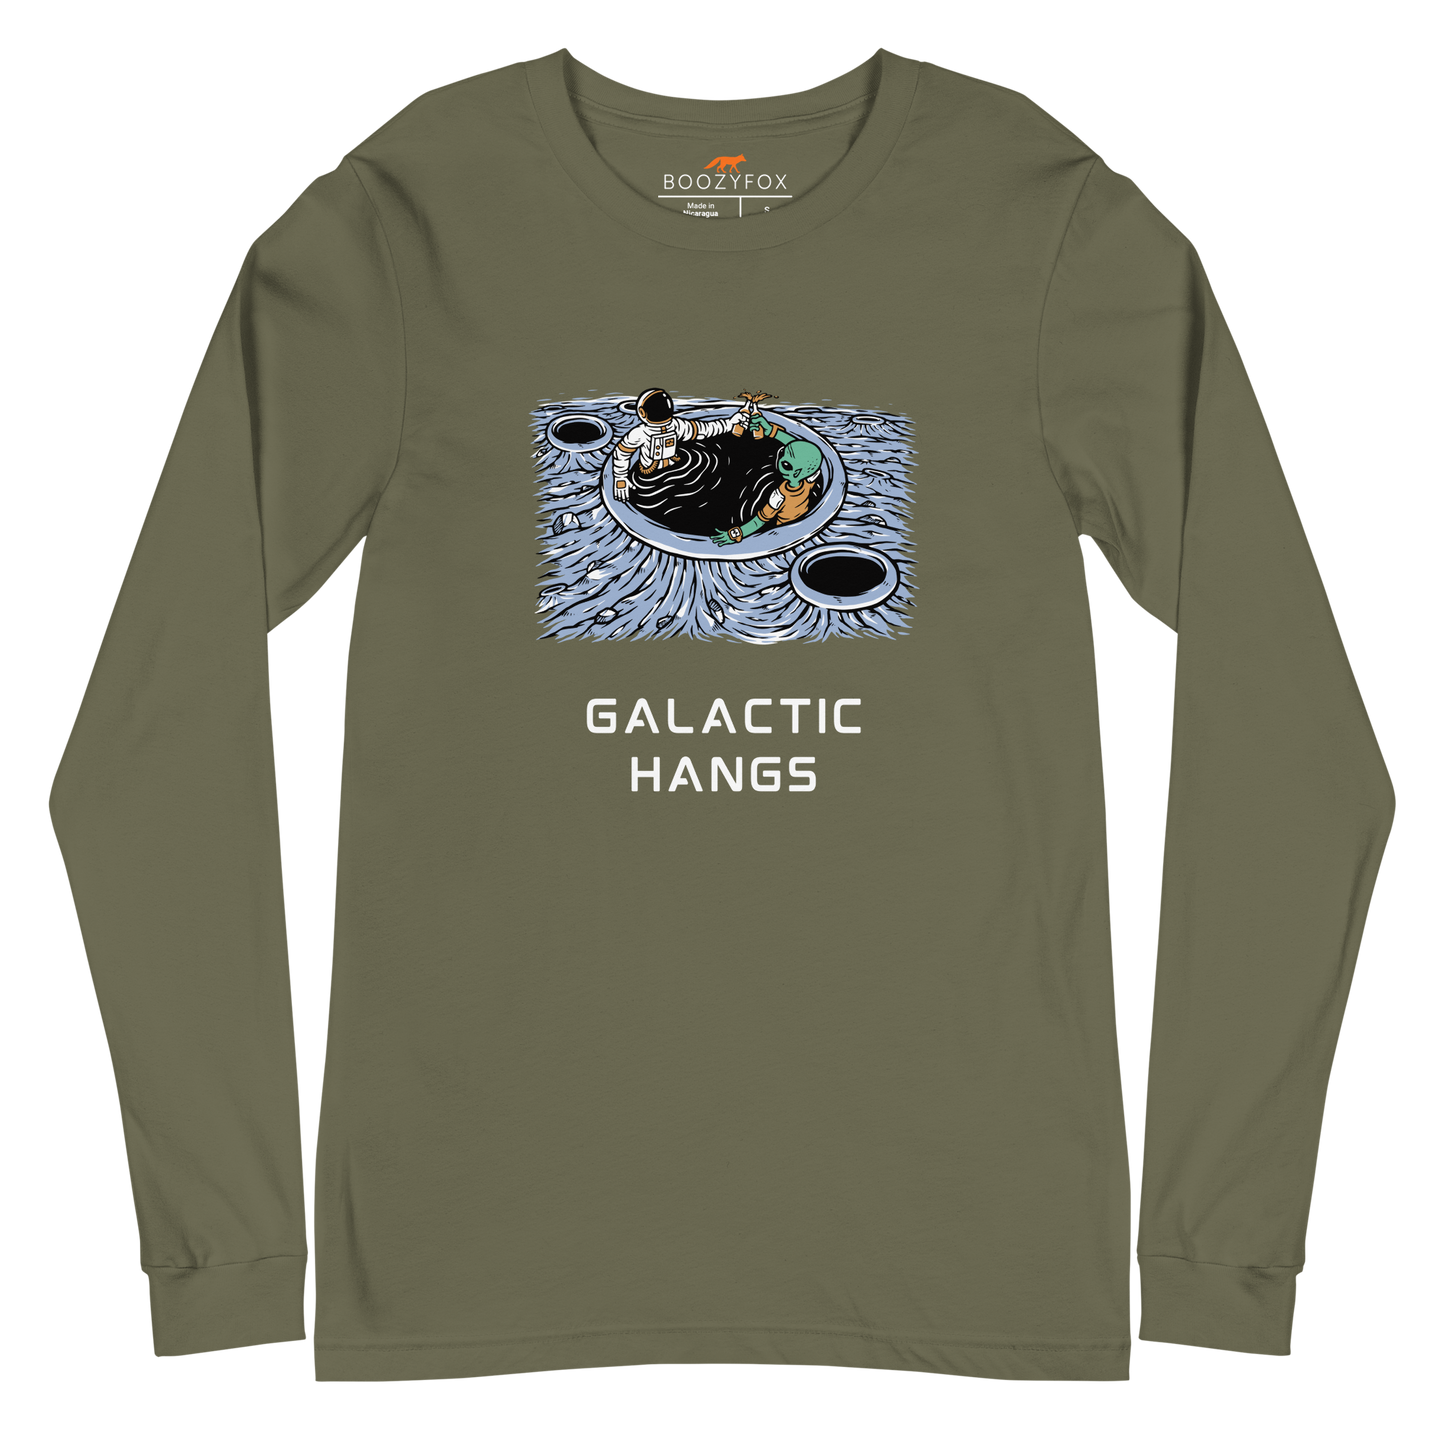 Military Green Galactic Hangs Long Sleeve Tee featuring an out-of-this-world graphic of an Astronaut and Alien Chilling Together - Funny Space Long Sleeve Graphic Tees - Boozy Fox